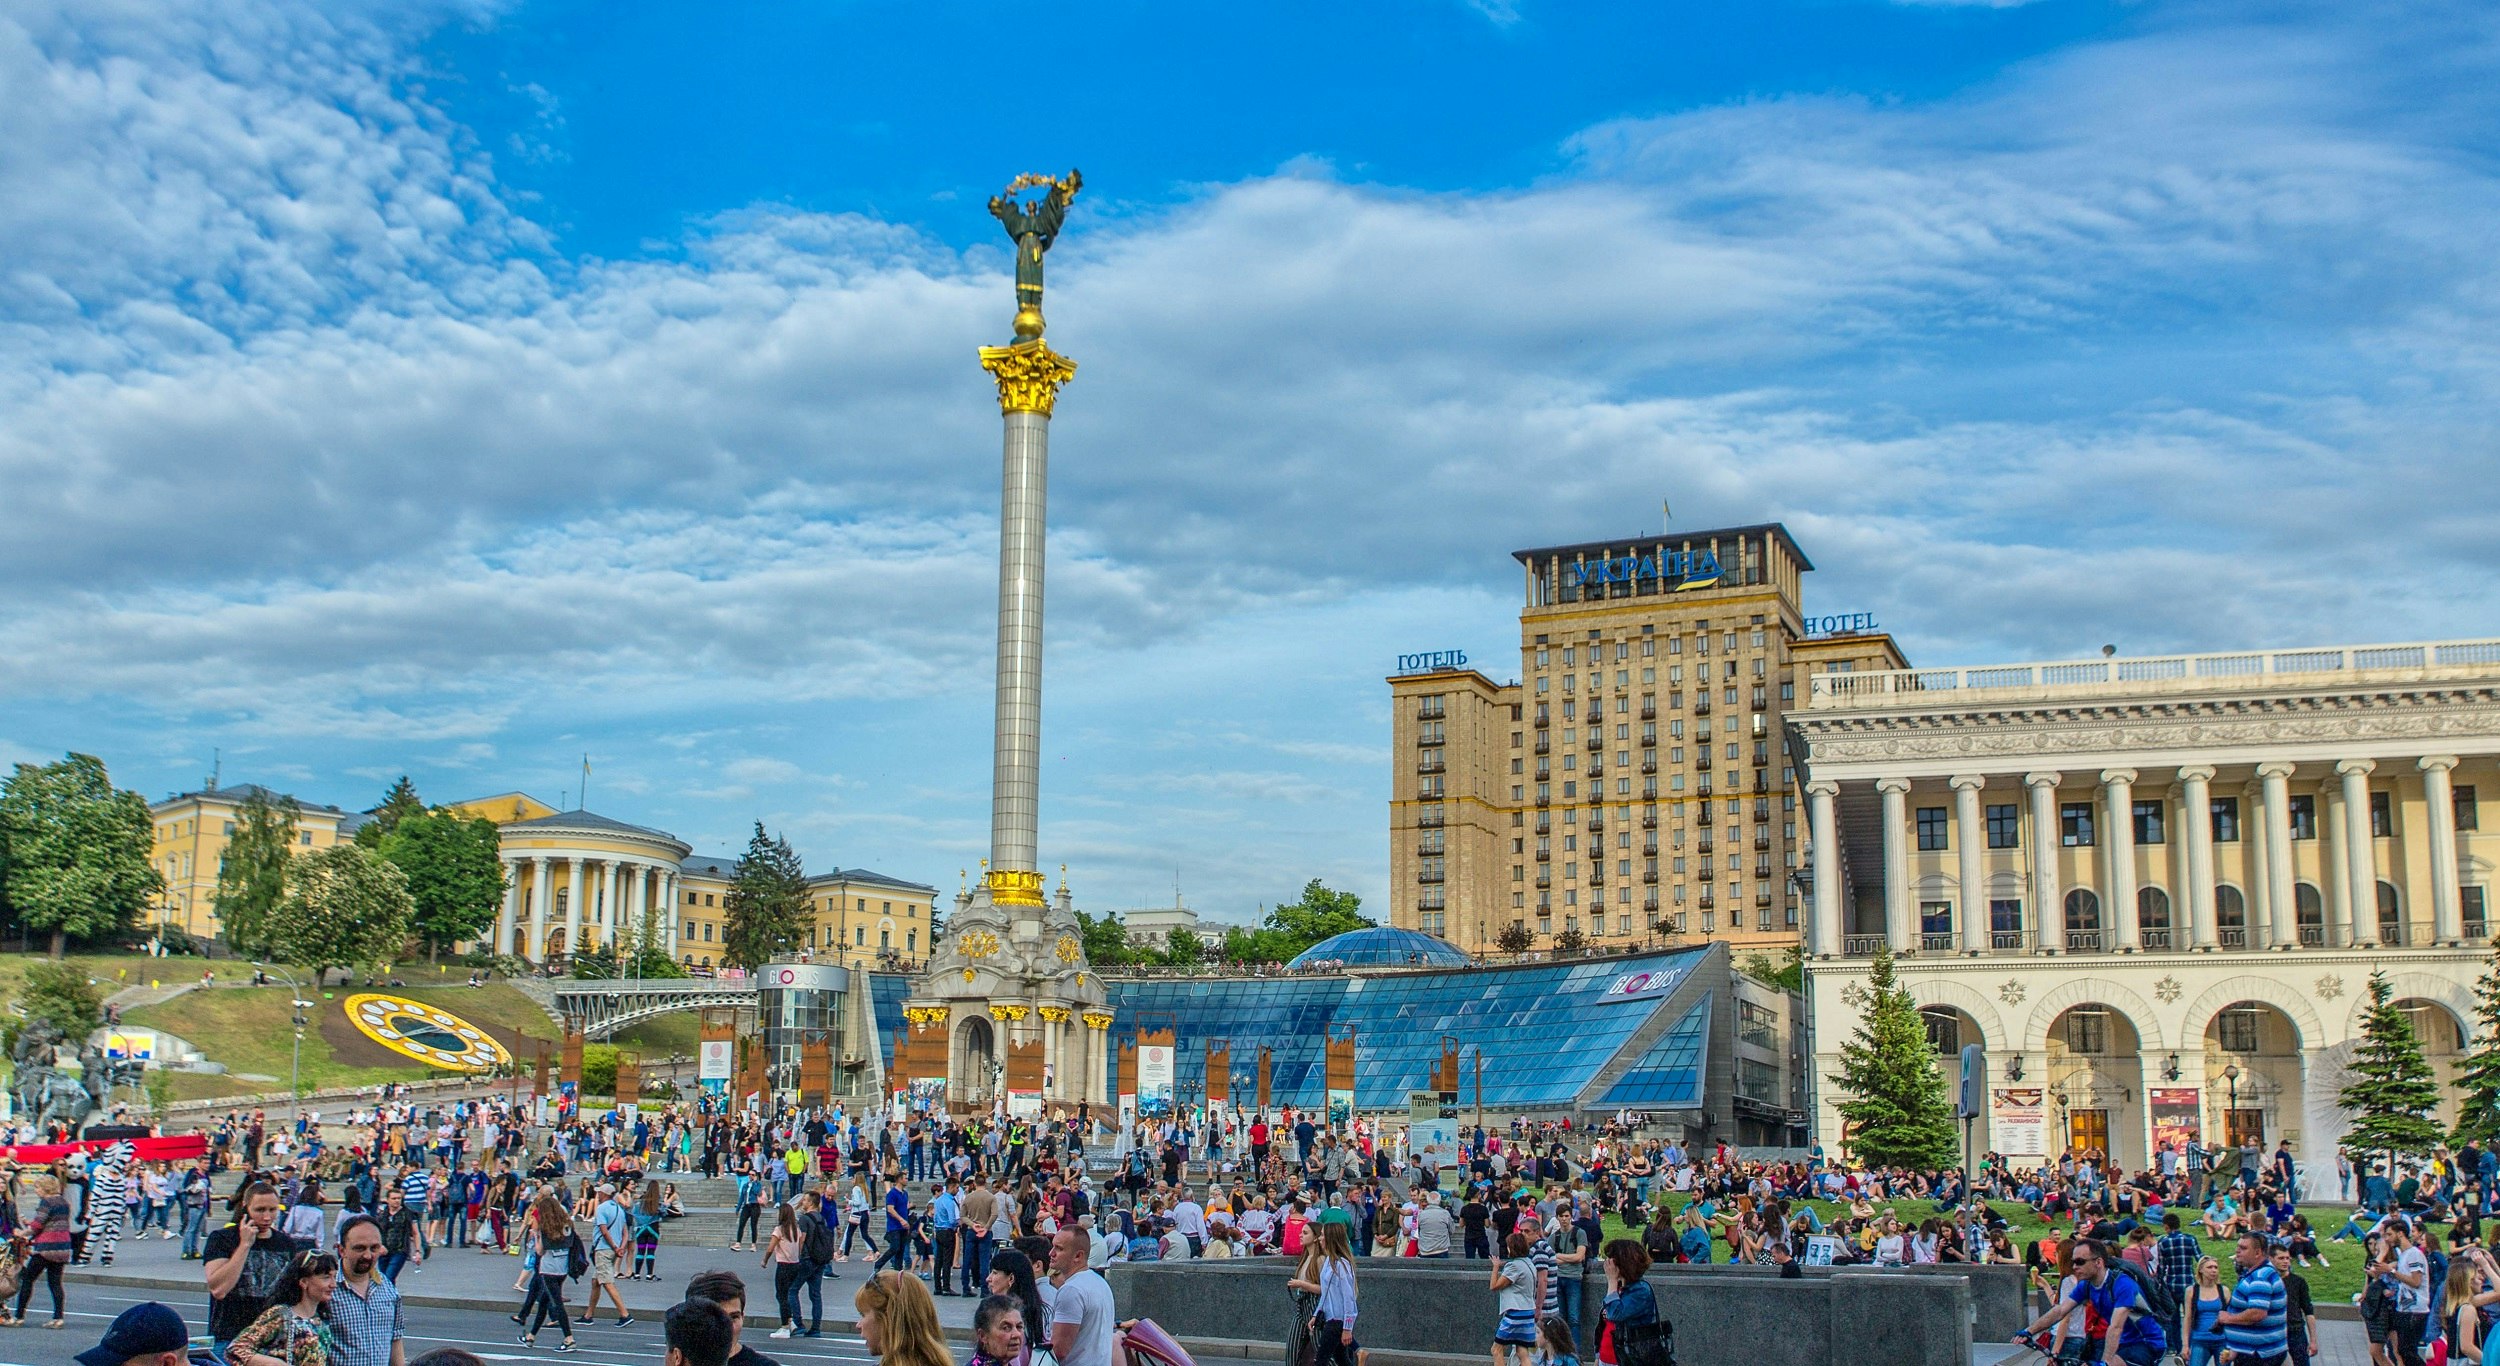 A square in the centre of Kiev is crowded with people. A large columned monument with an angel on top dominates the square